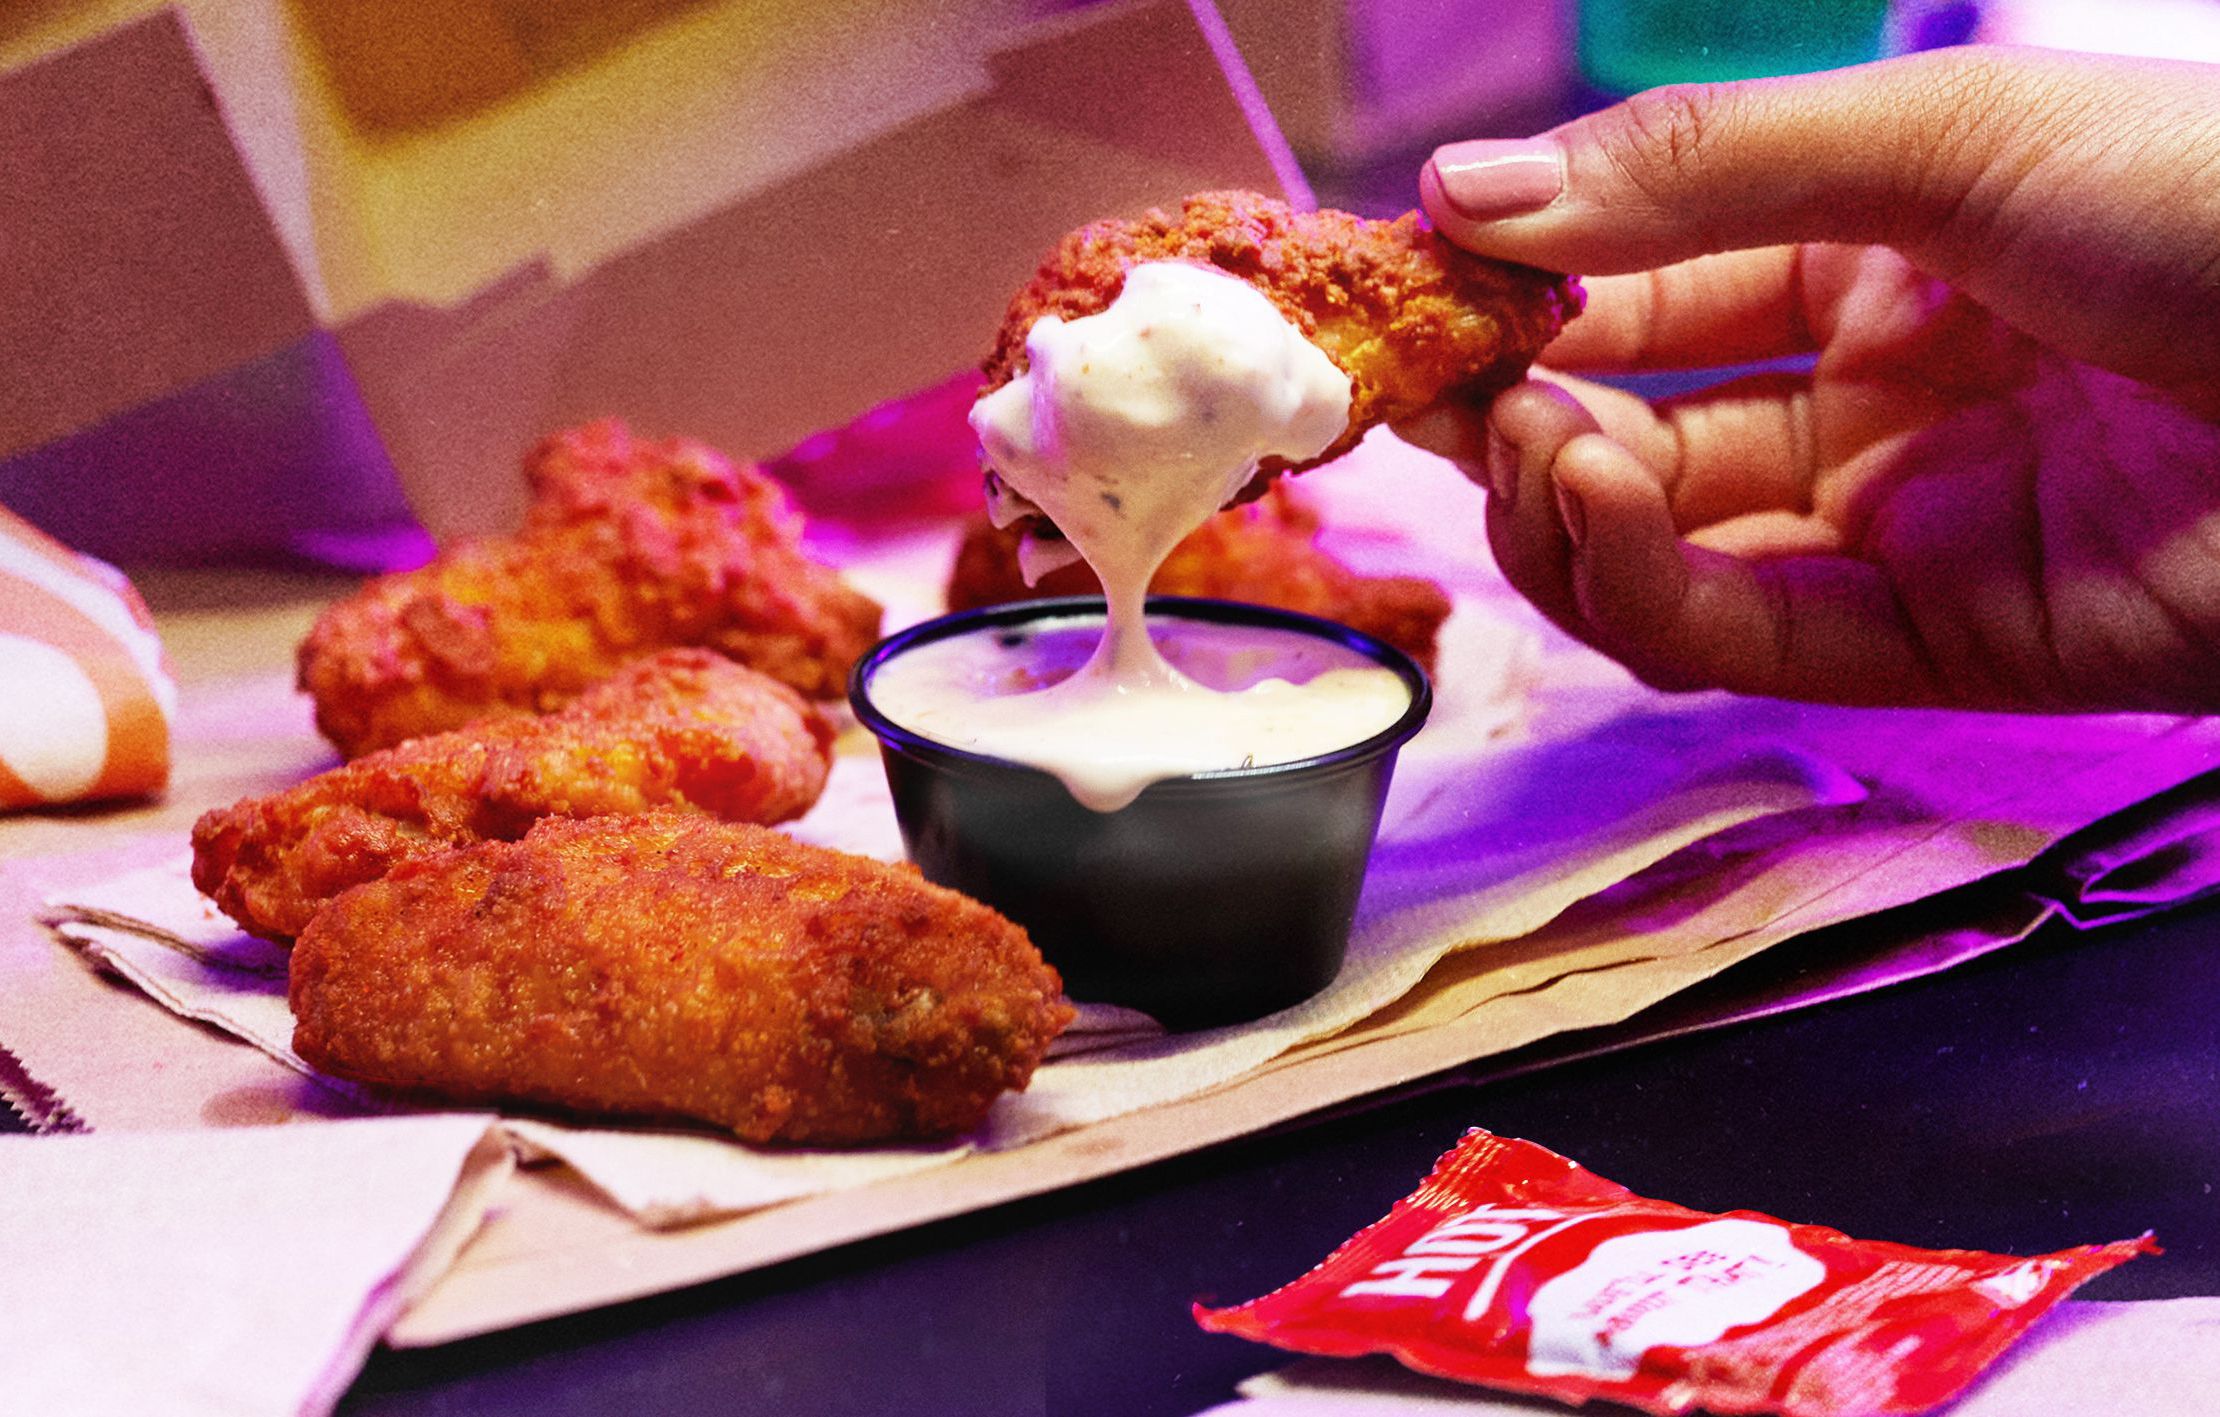 Crispy Chicken Wings with a Spicy Ranch Sauce are Back at Taco Bell